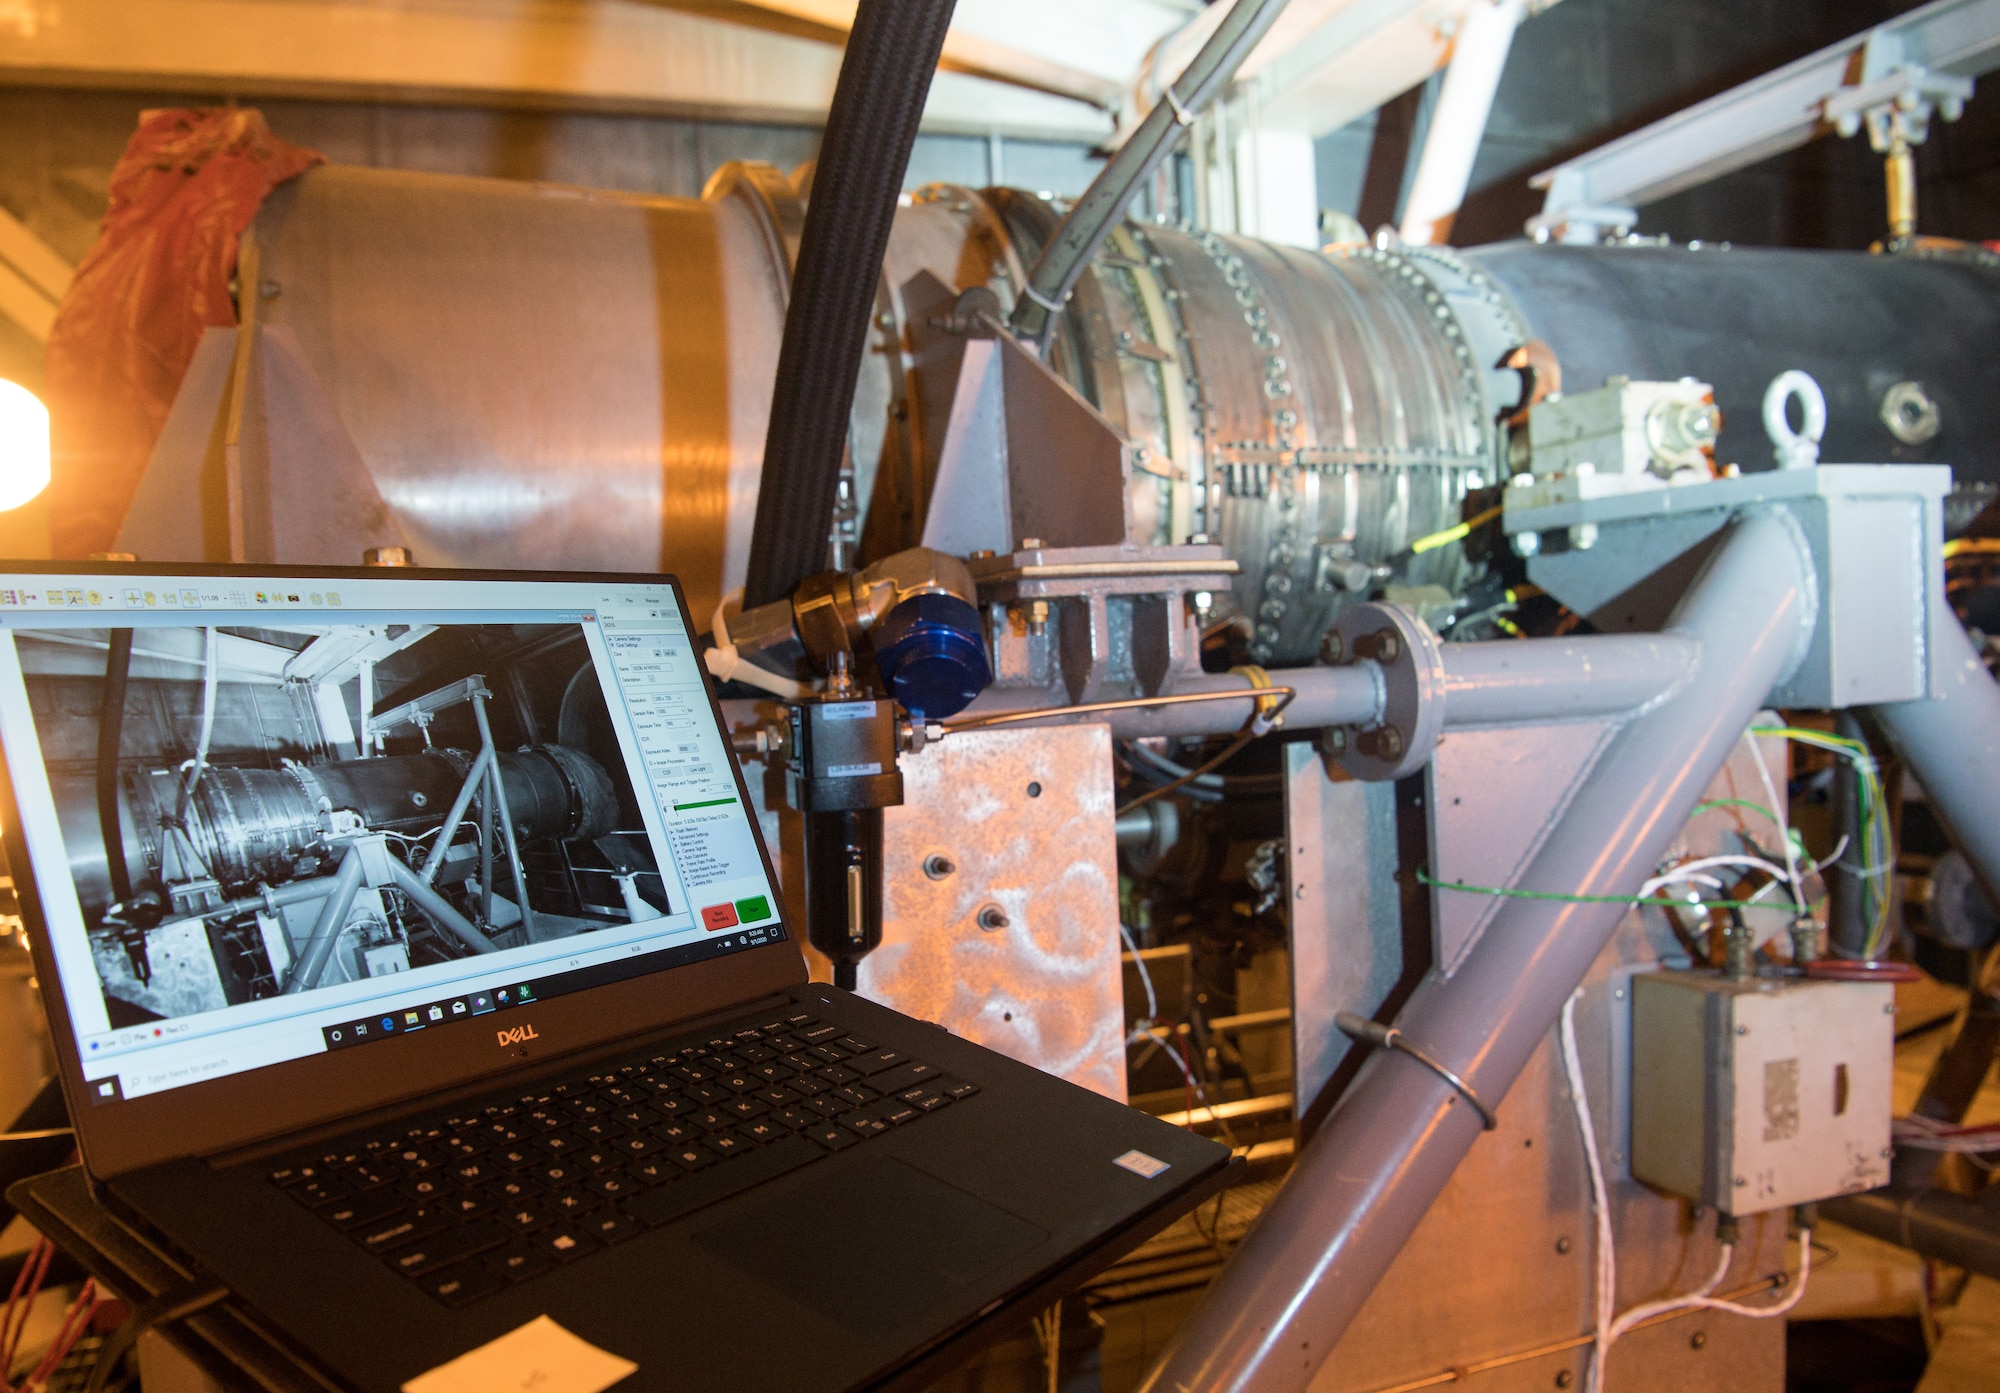 The feed from a high-speed camera is displayed on a laptop in software that uses the video to analyze vibrations, Sept. 1, 2020, in the sea-level test cell SL-1 at Arnold Air Force Base, Tenn. (U.S. Air Force photo by Jill Pickett)